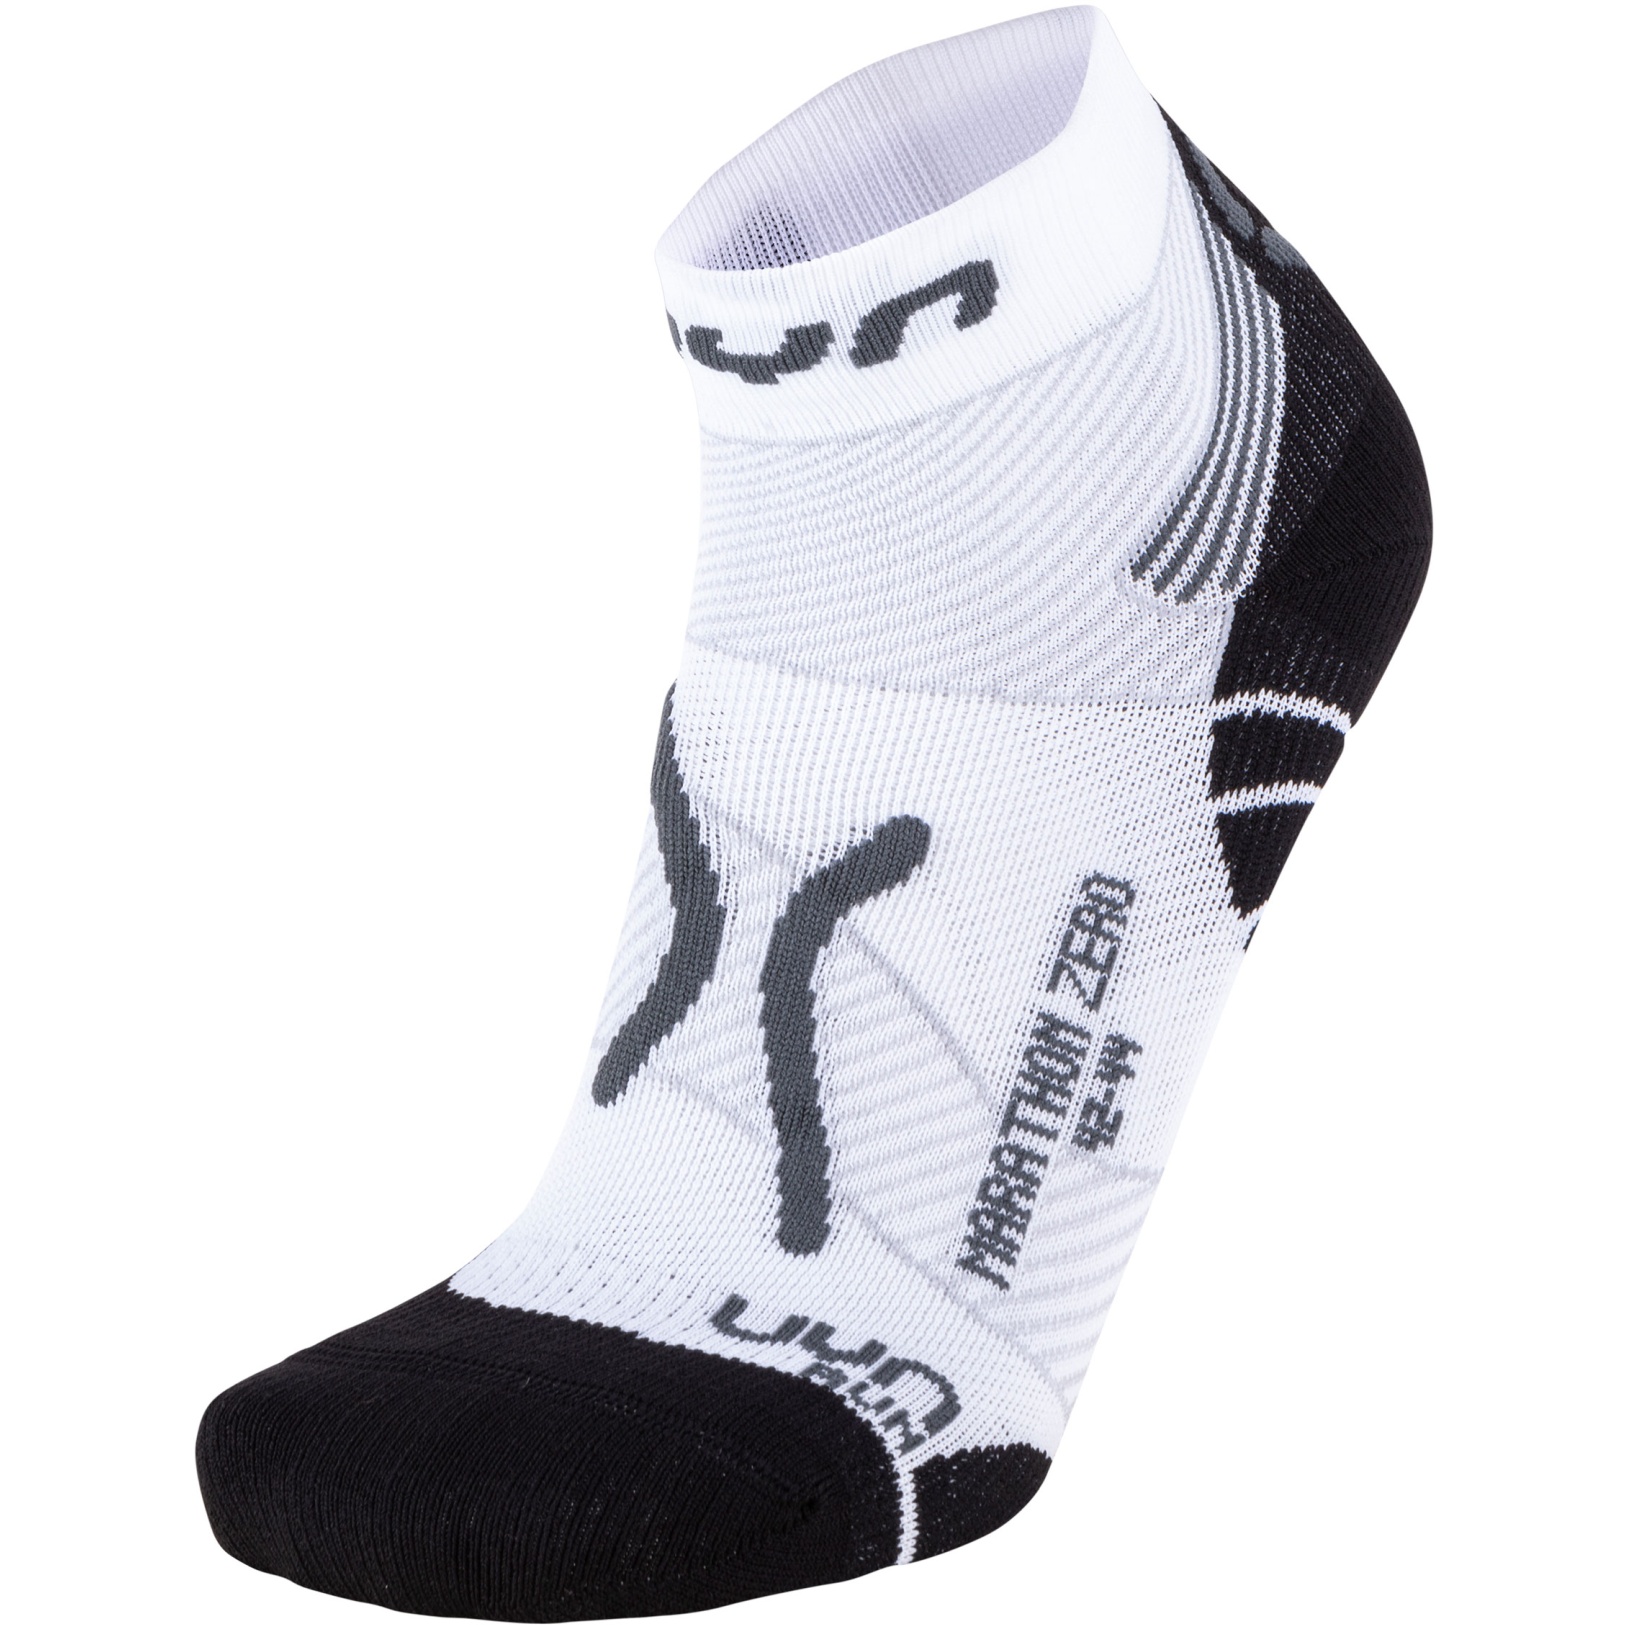 UYN RUN COMPRESSION FLY CHAUSSETTES DE RUNNING Femme ANTHRACITE